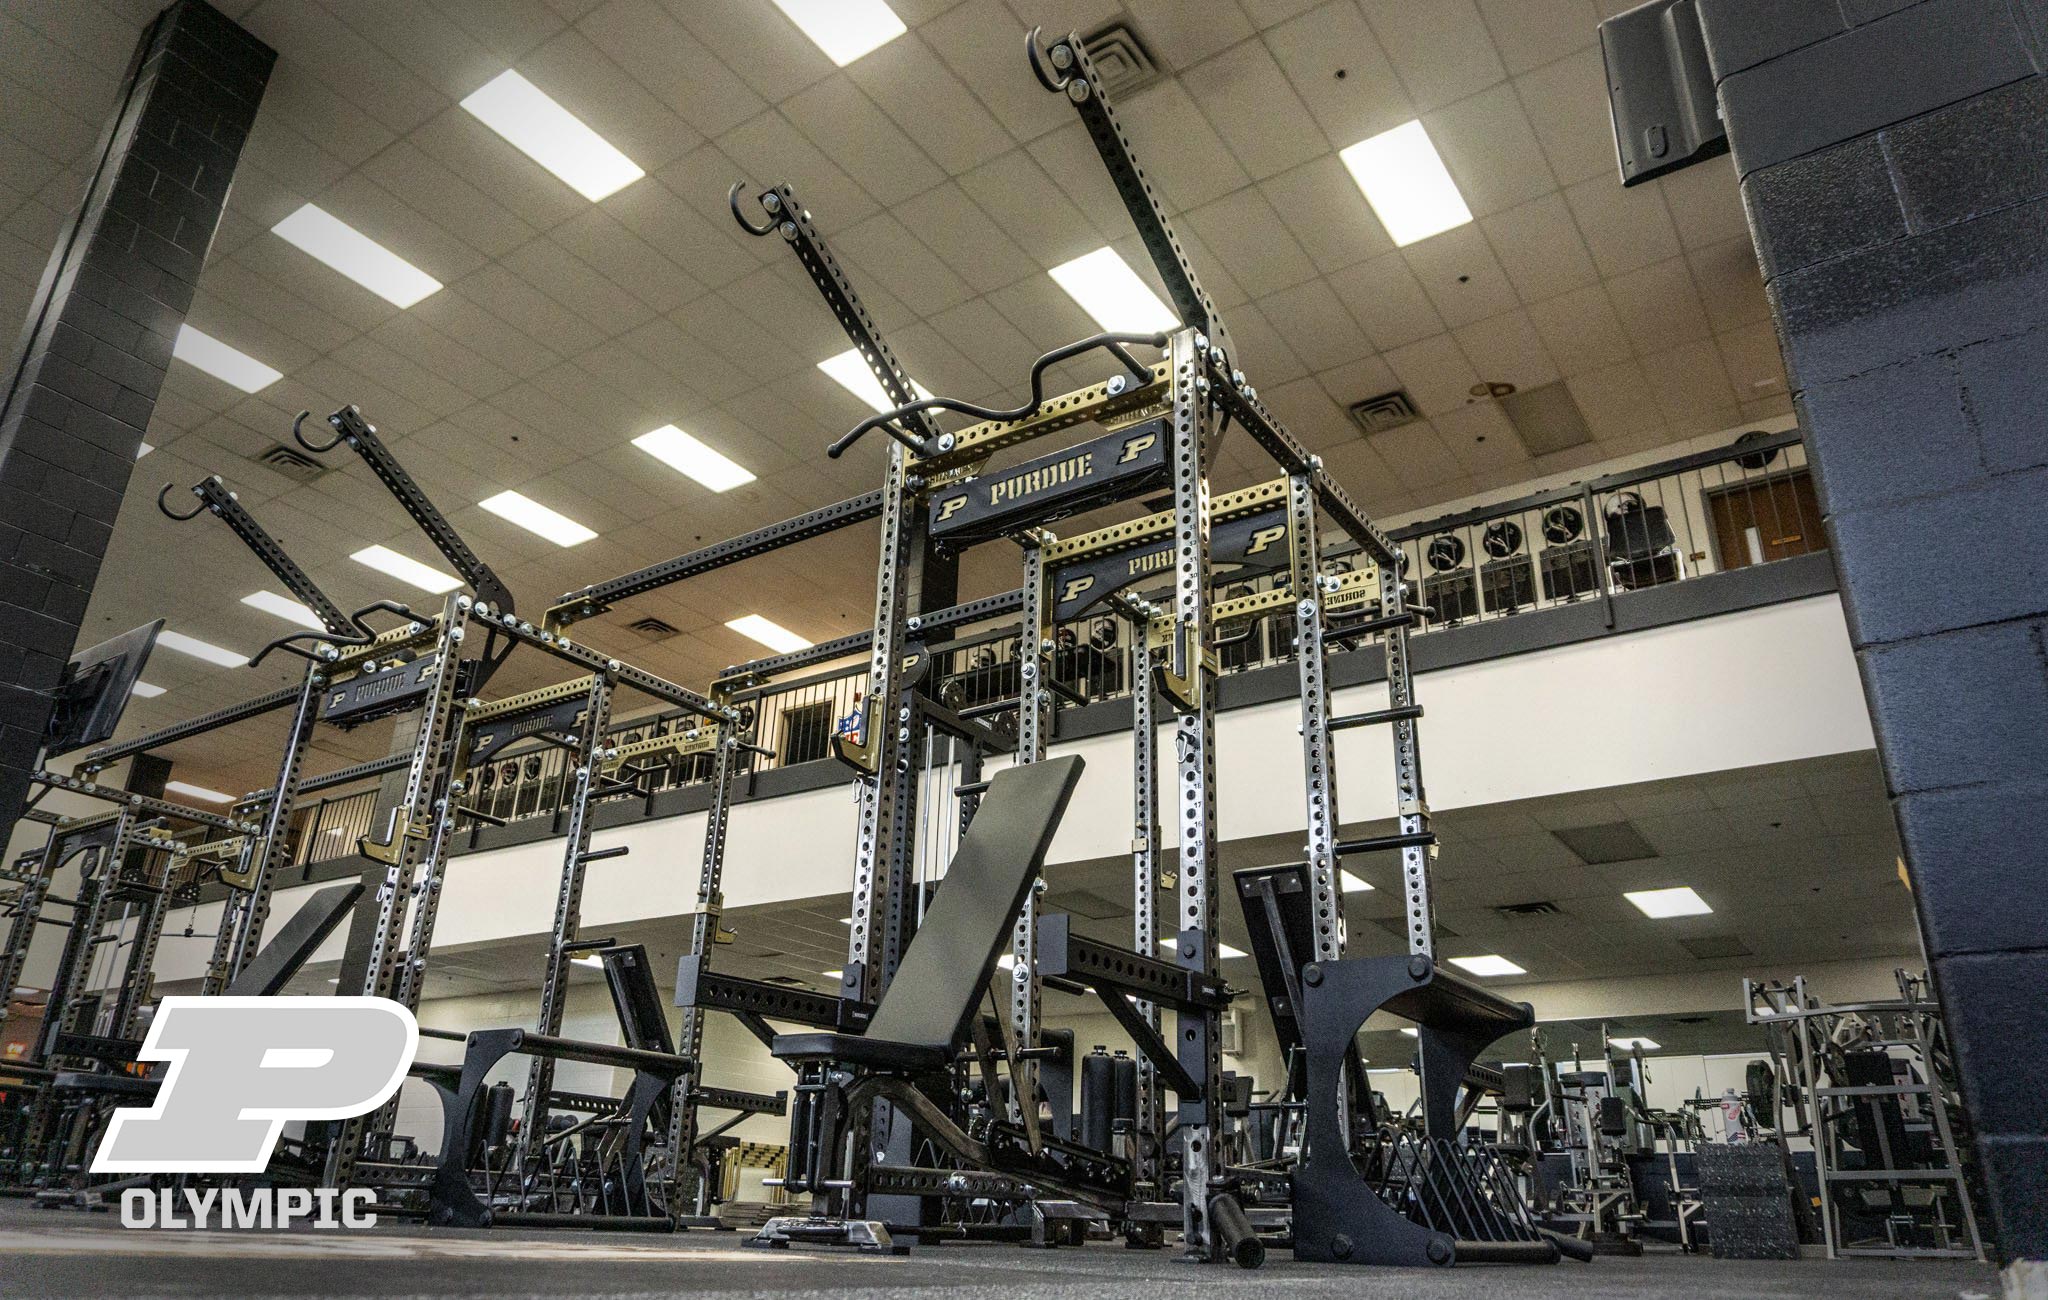 Purdue University Olympic Sorinex strength and conditioning facility